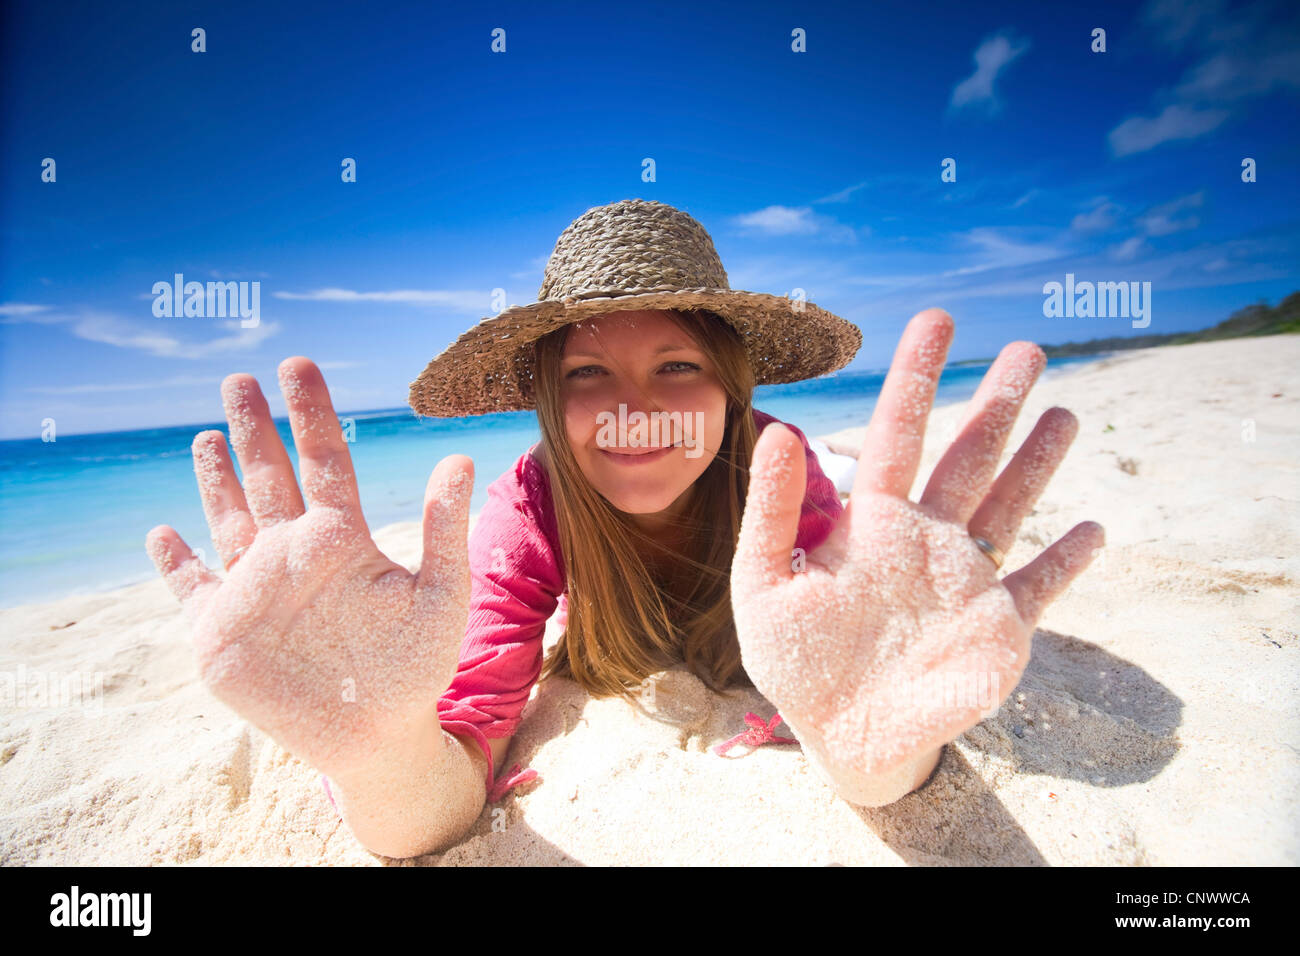 Happy young woman on white sand tropical beach, Maldives, Indian Ocean Stock Photo